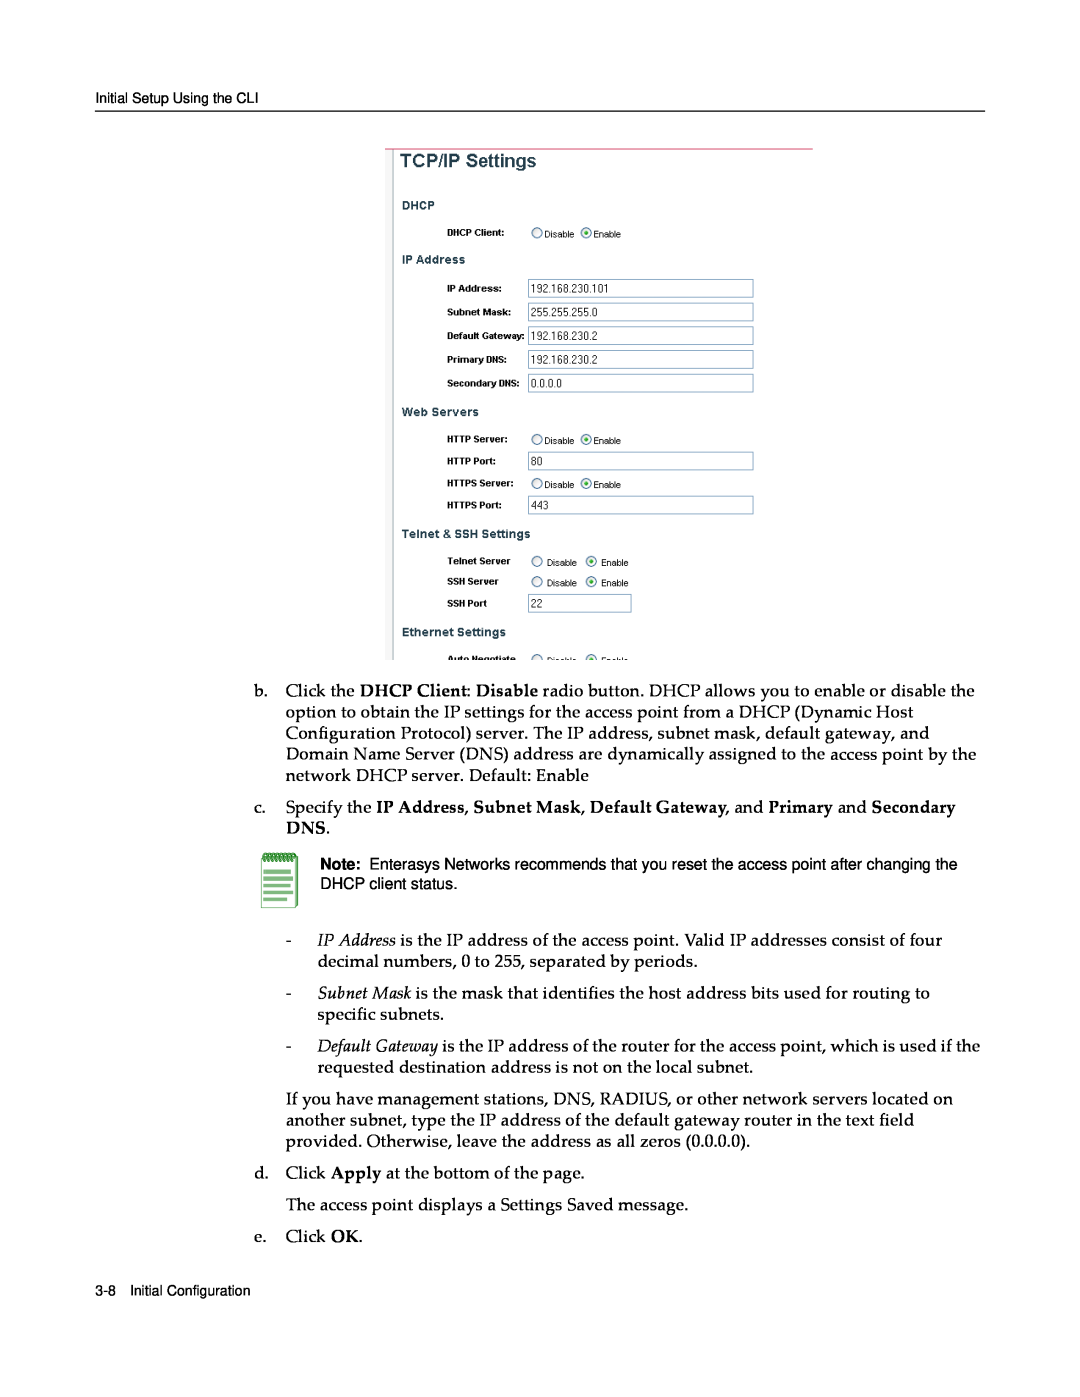 Enterasys Networks RBT-4102 manual d. Click Apply at the bottom of the page 